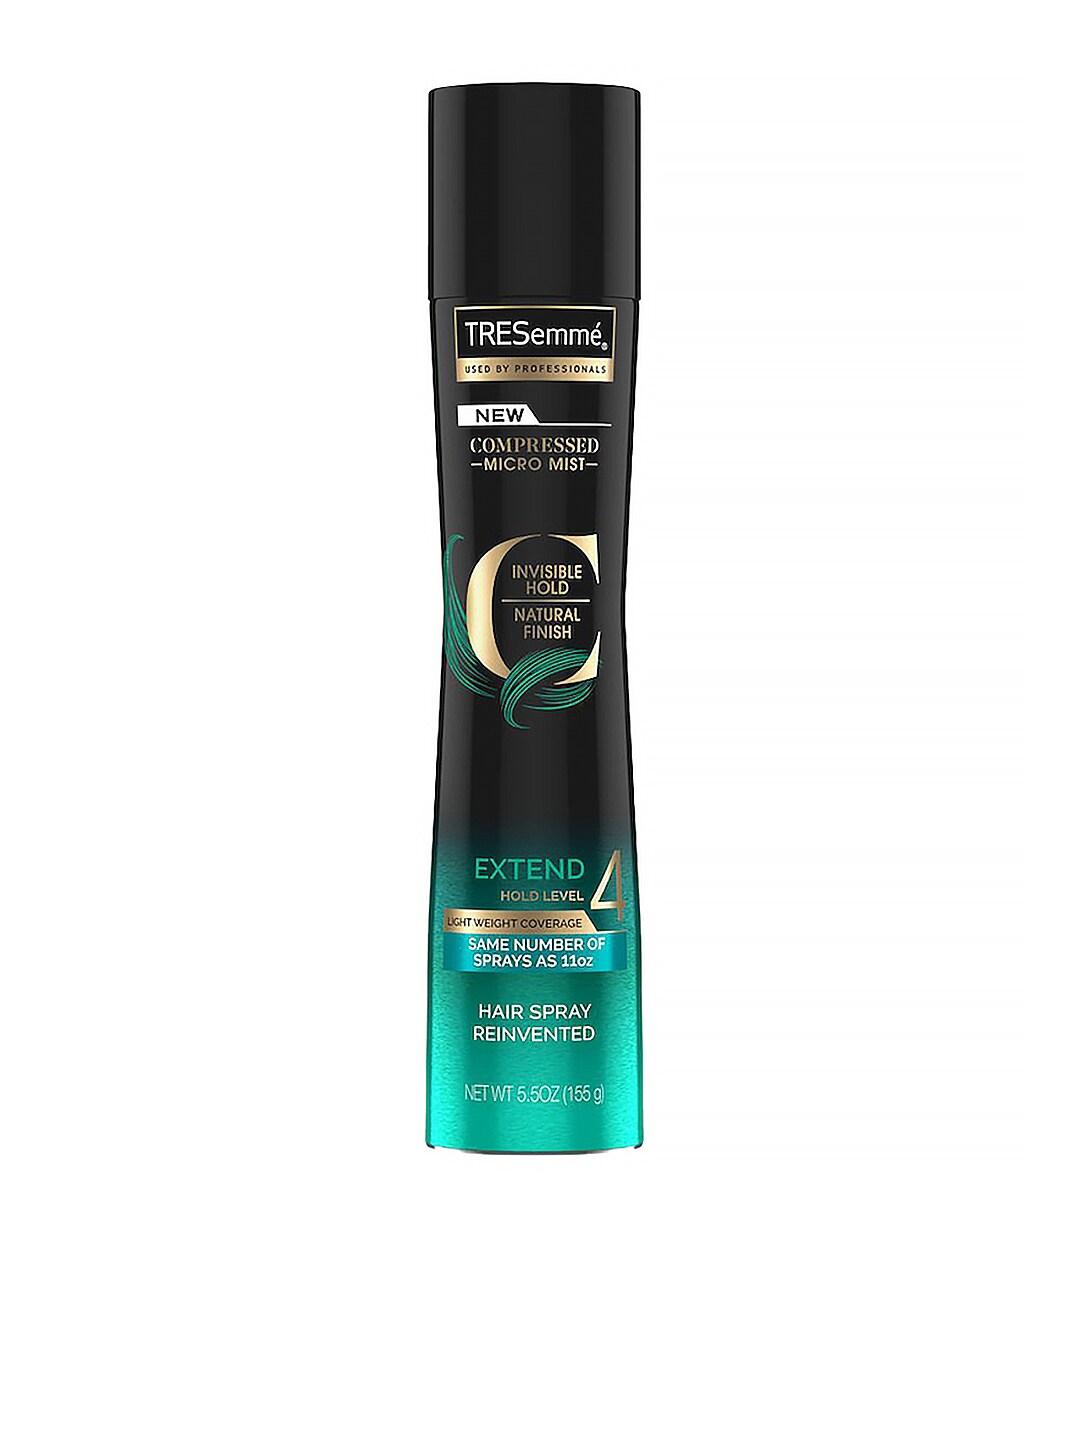 TRESemme Compressed Micro Mist Extend Hold Level 4 Lightweight Coverage Hair Spray 155 g